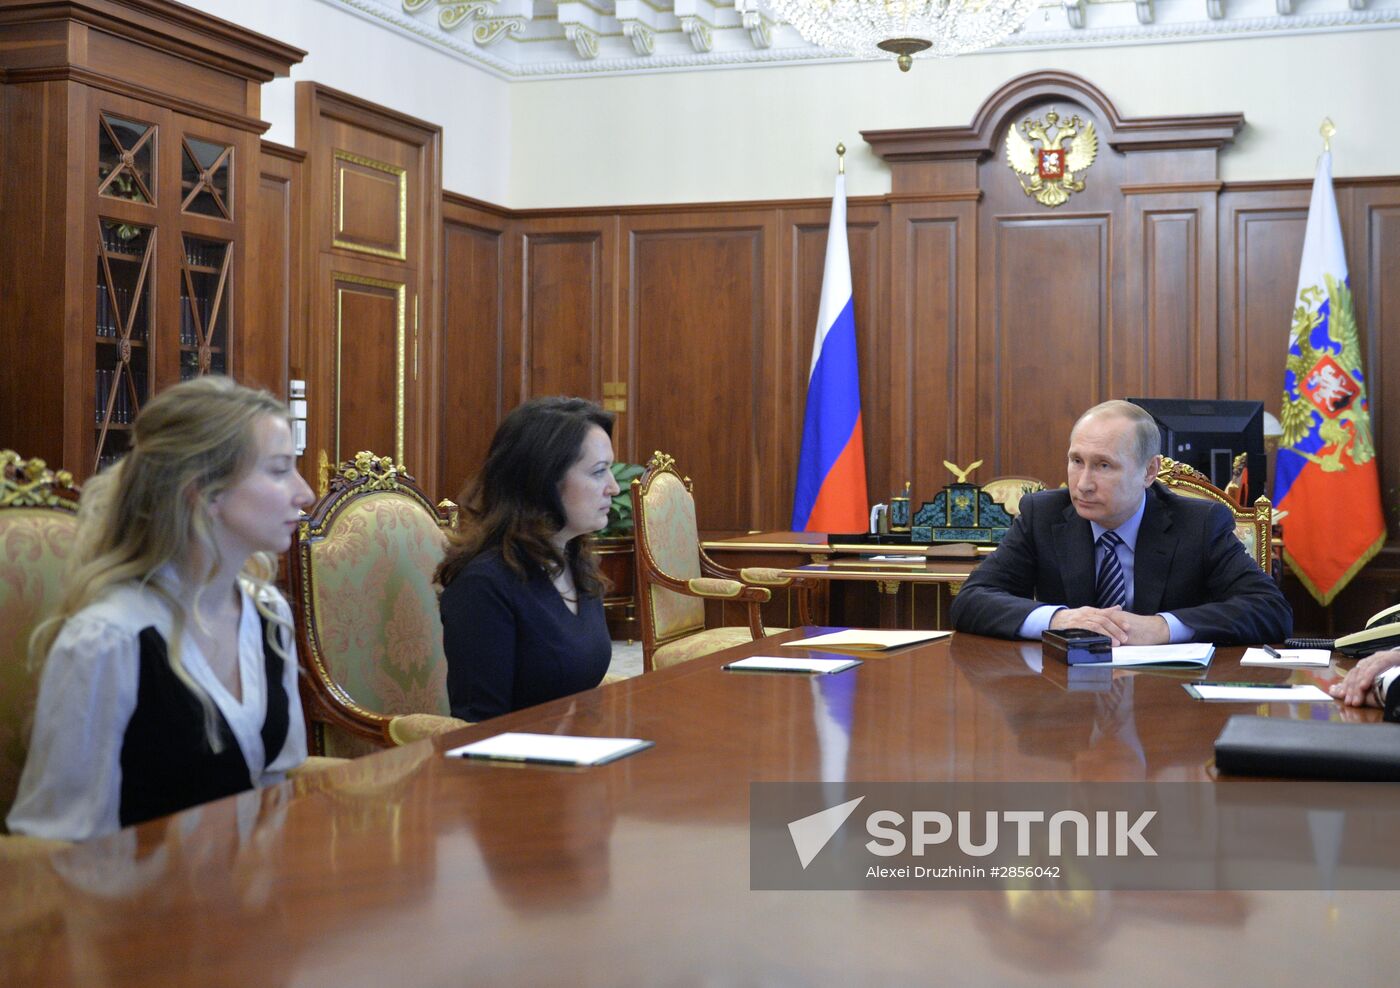 President Vladimir Putin meets with widows of journalists killed in Ukraine performing professional duty